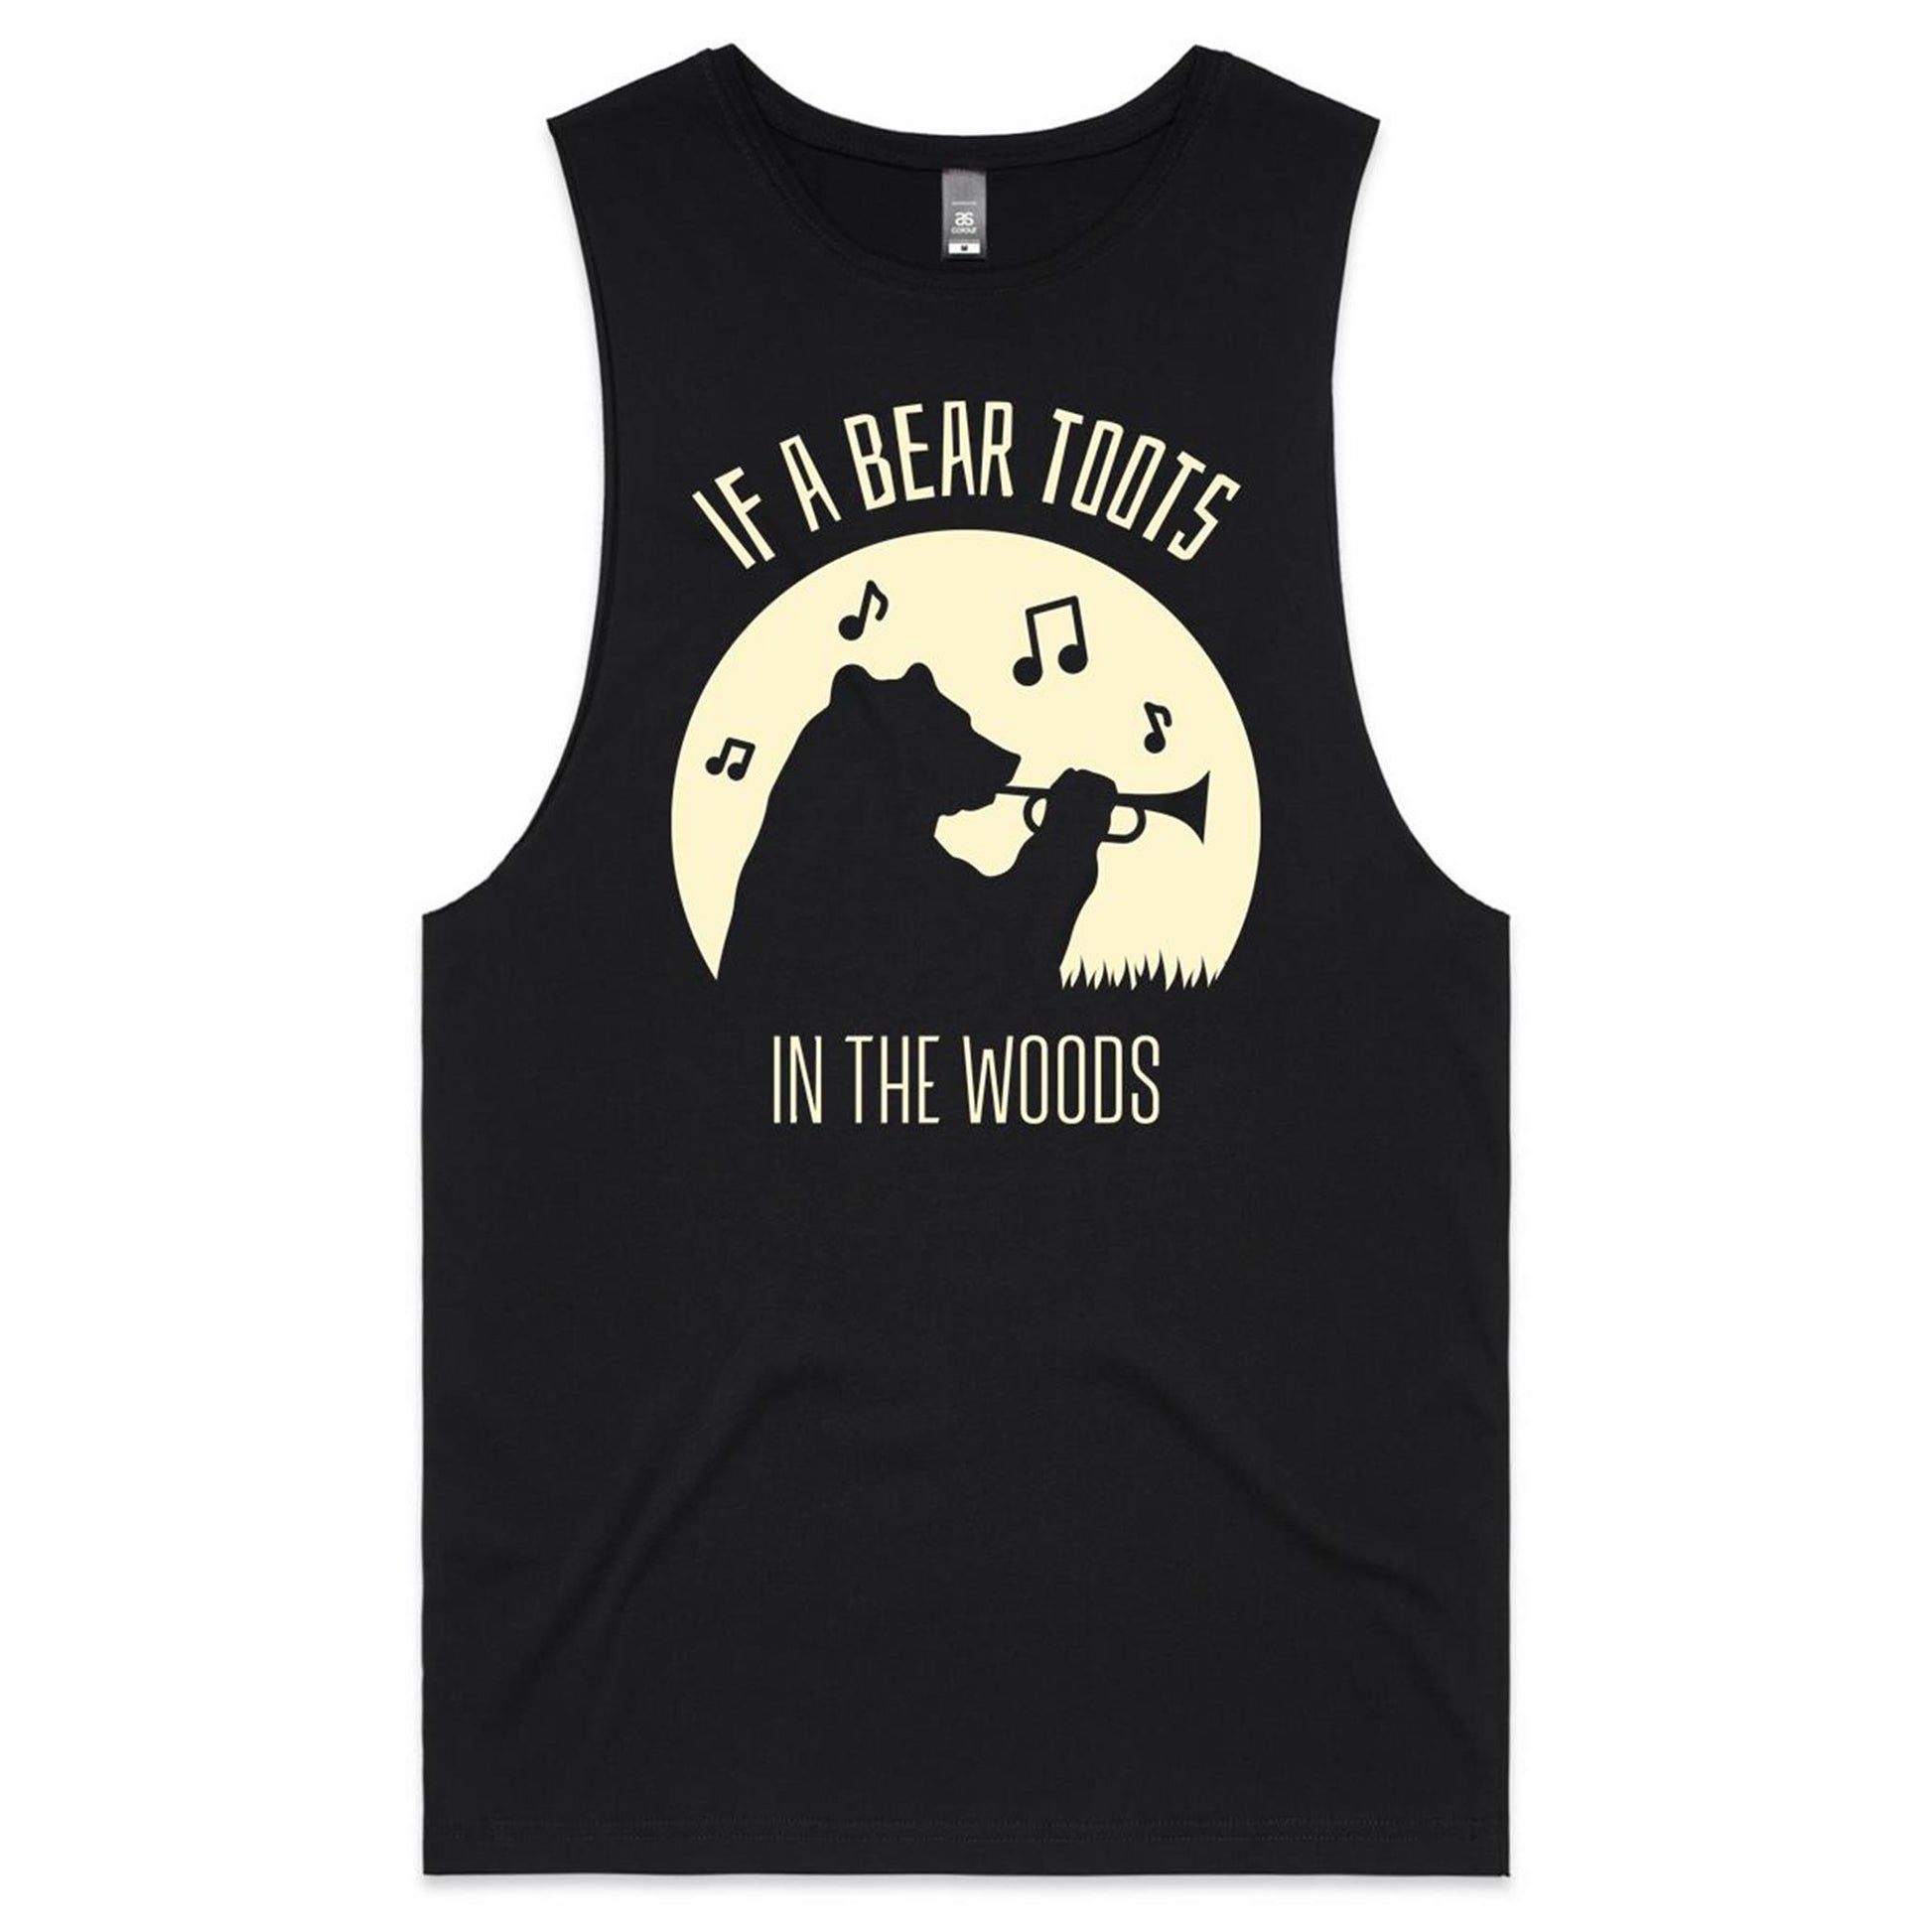 If A Bear Toots In The Woods, Trumpet Player - Mens Tank Top Tee Black Mens Tank Tee